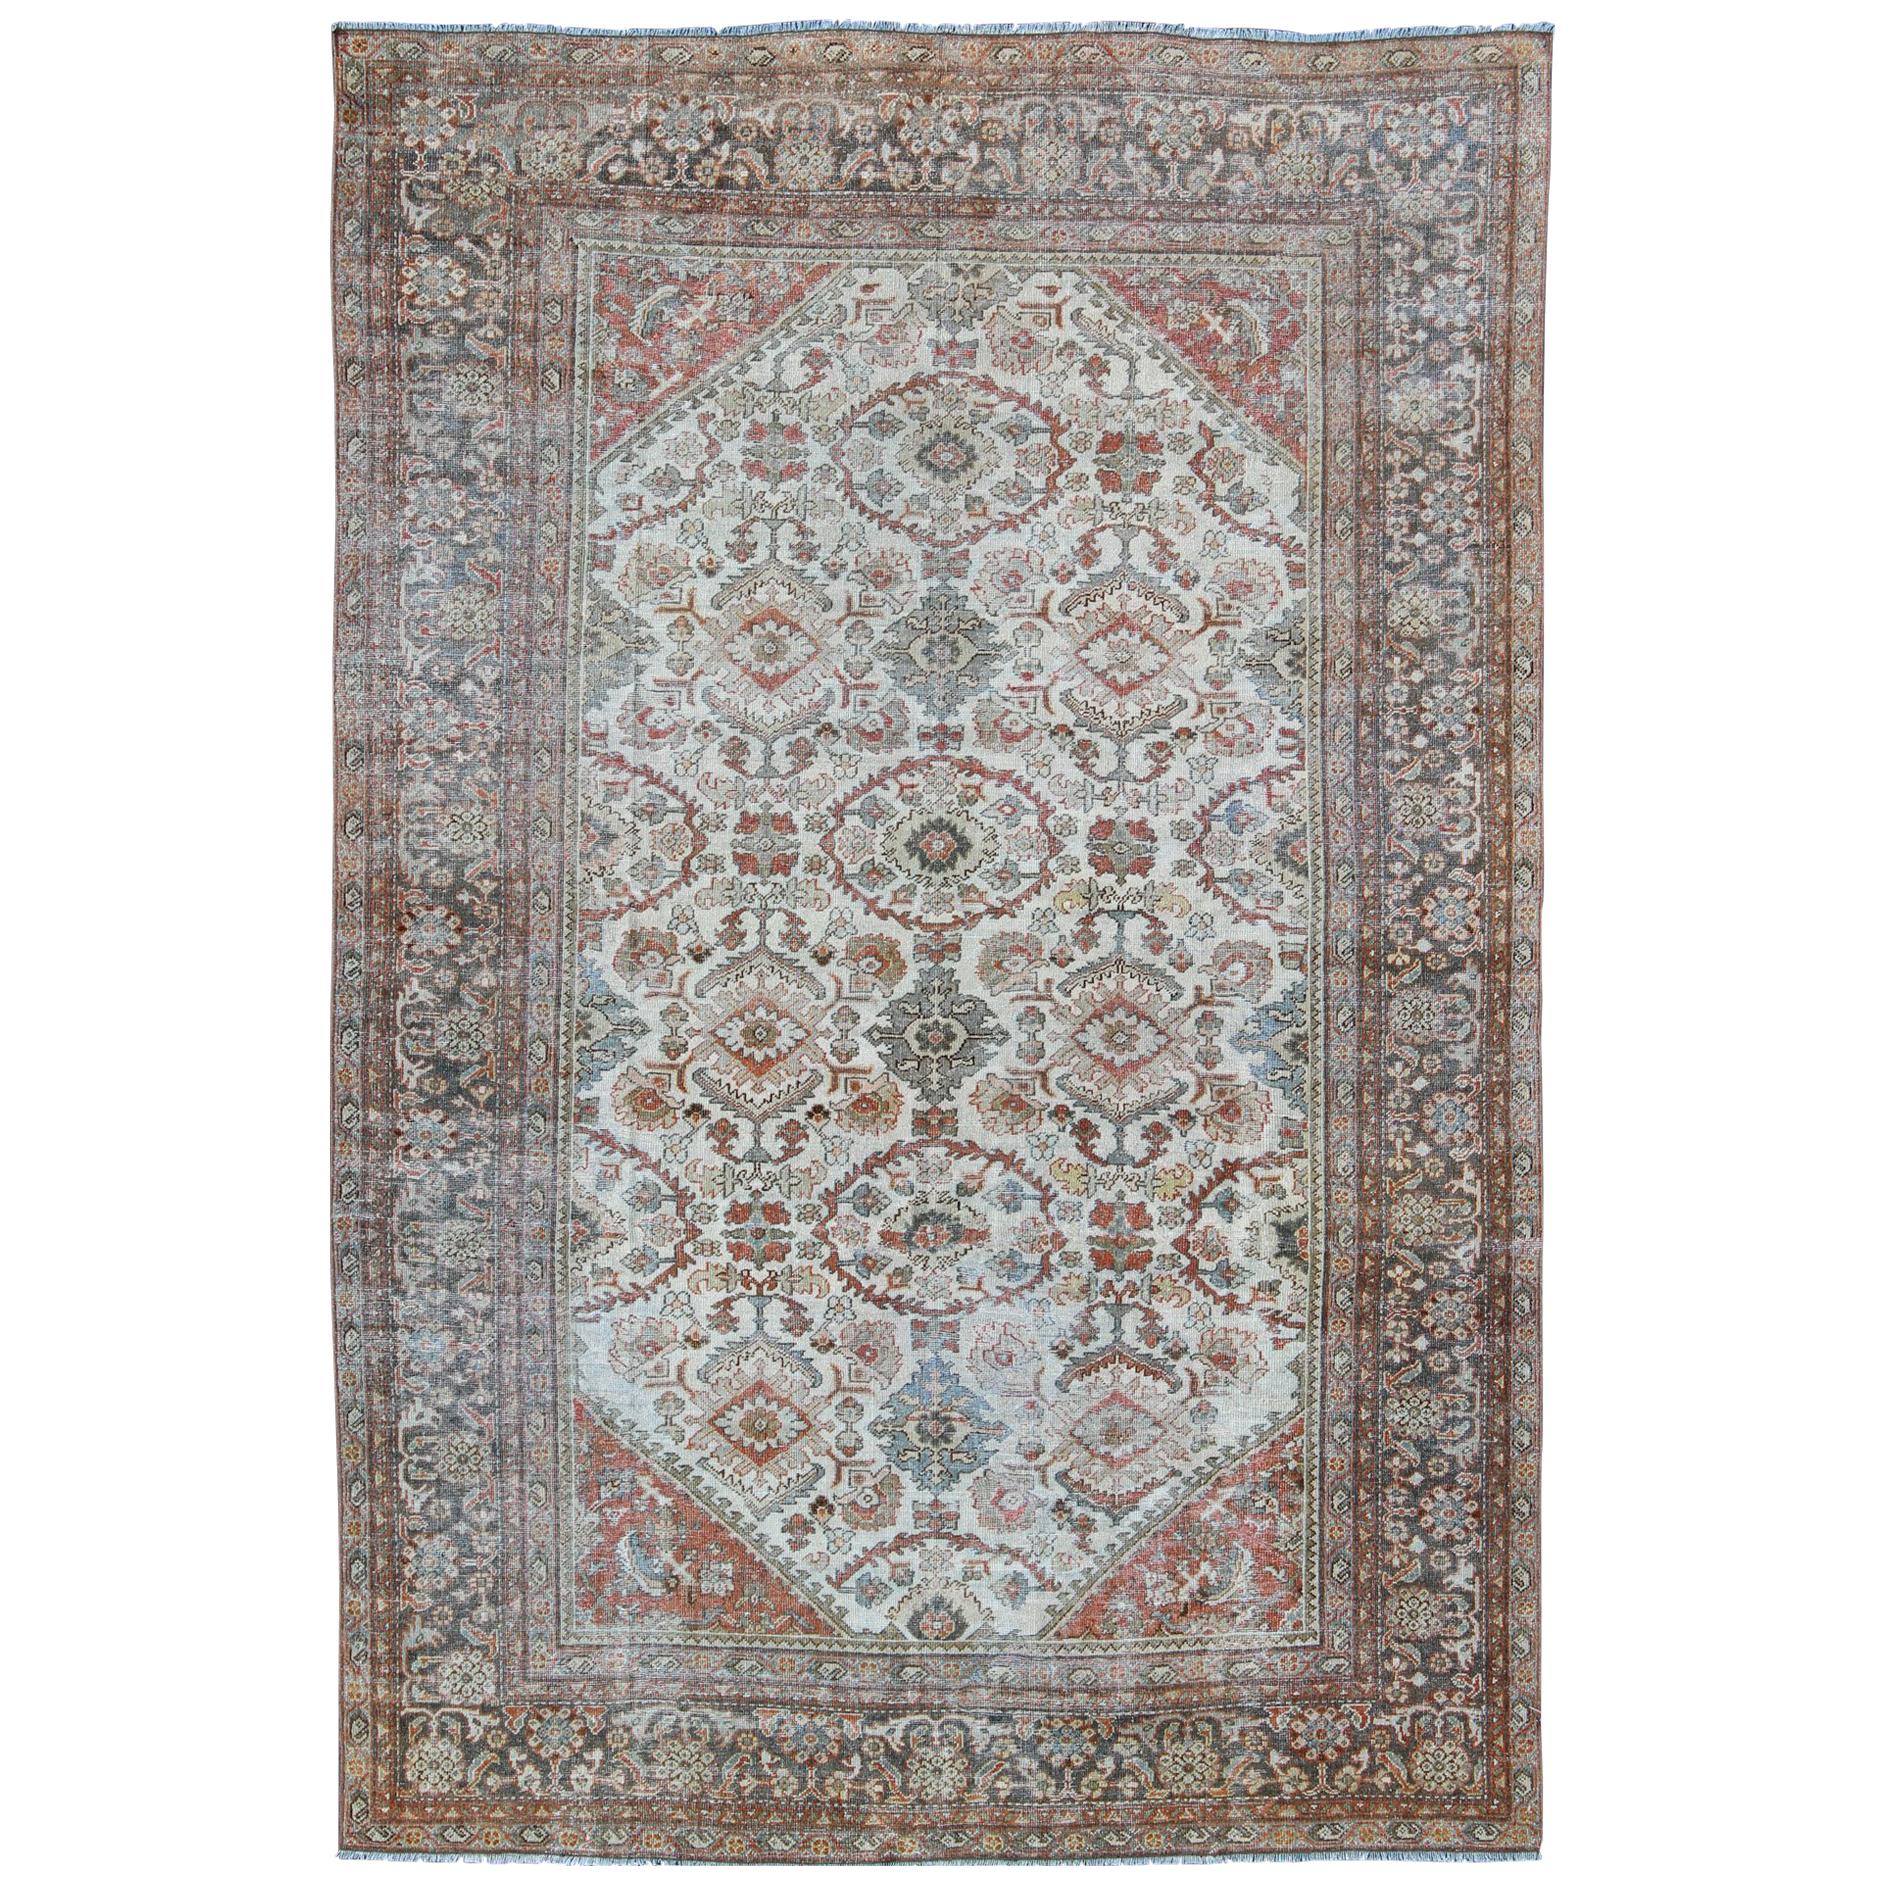 Antique Persian Sultanabad-Mahal Rug in Ivory, Terracotta, Light Blue, Charcoal